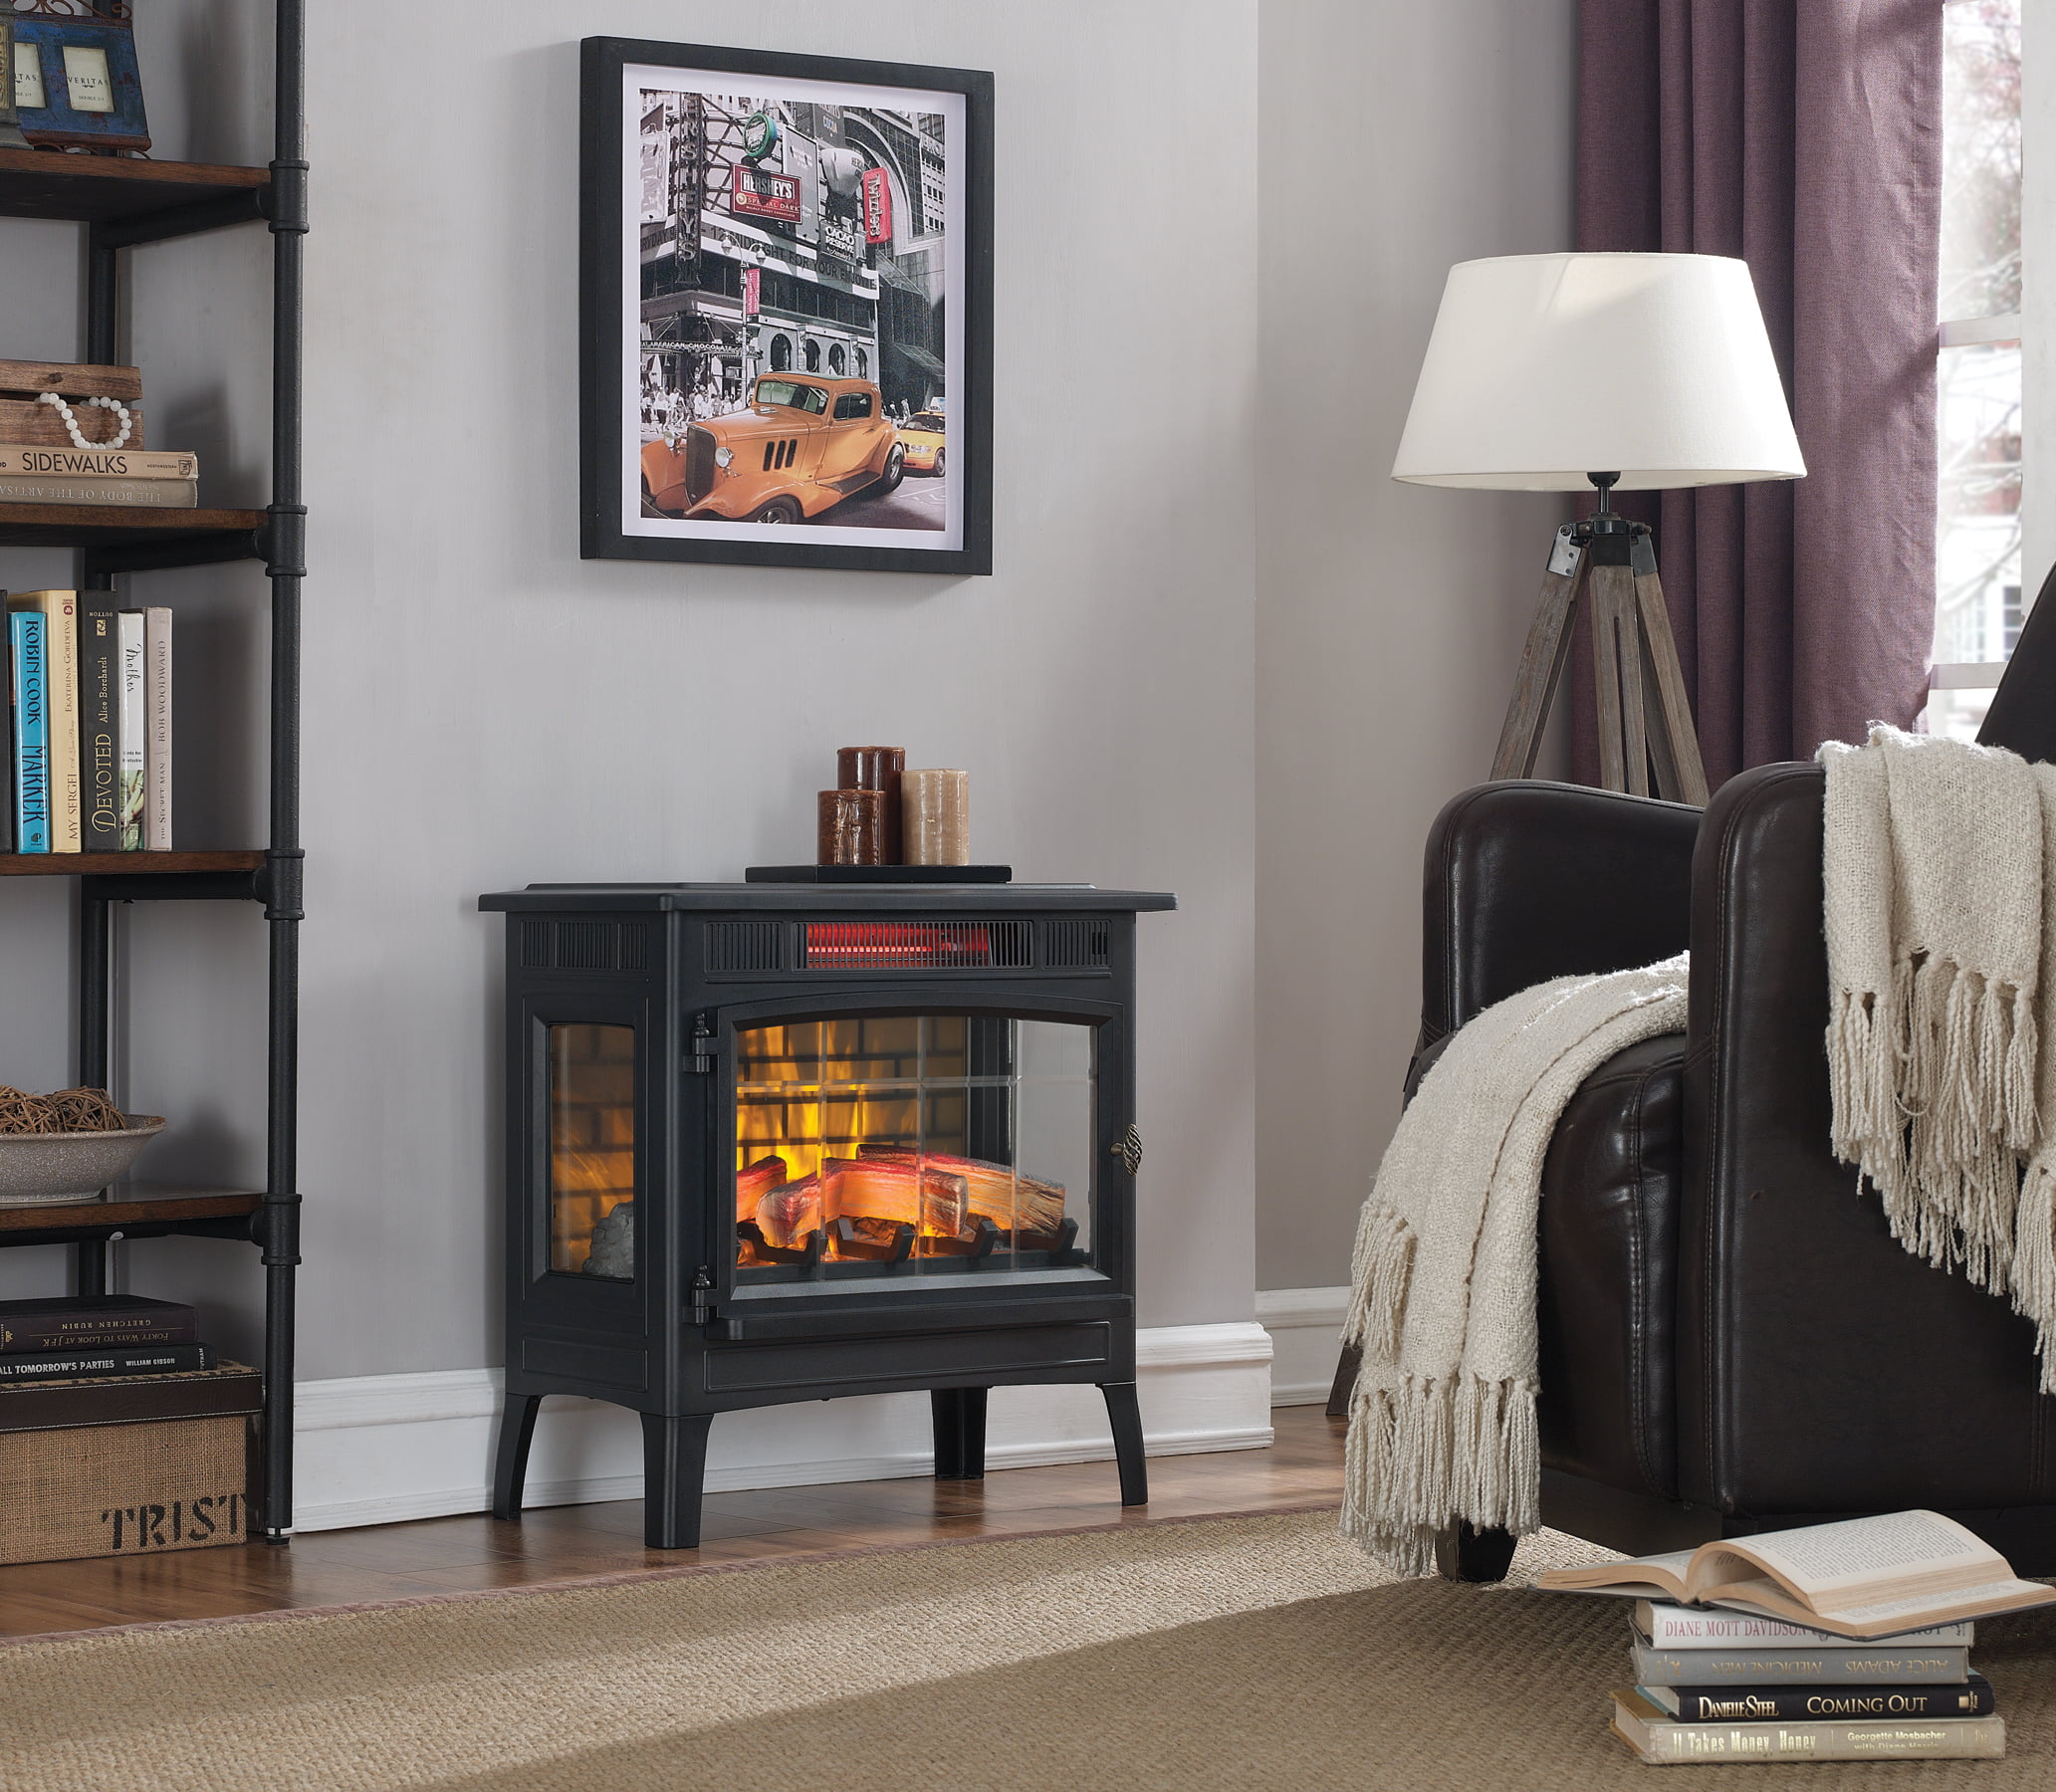 costco wlectric fireplace 3d heater